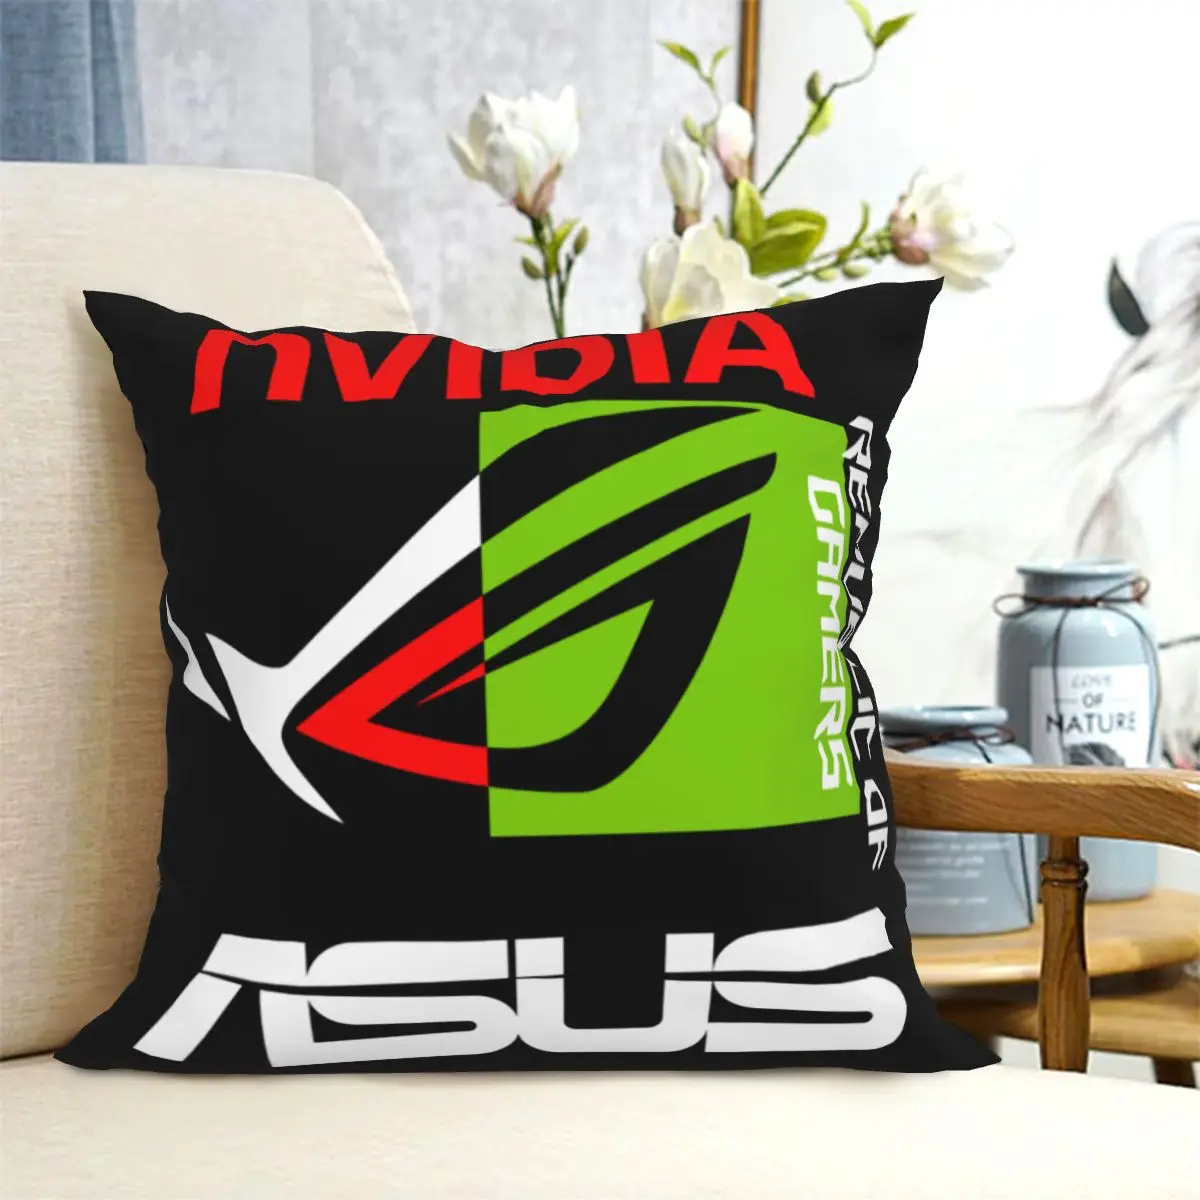 Terse Nvidia X Asus Rog - Republic Of Gamers Lap Pc Throw Pillow Cover  Pillowcase Bedding Soft Skin Cushion Cover